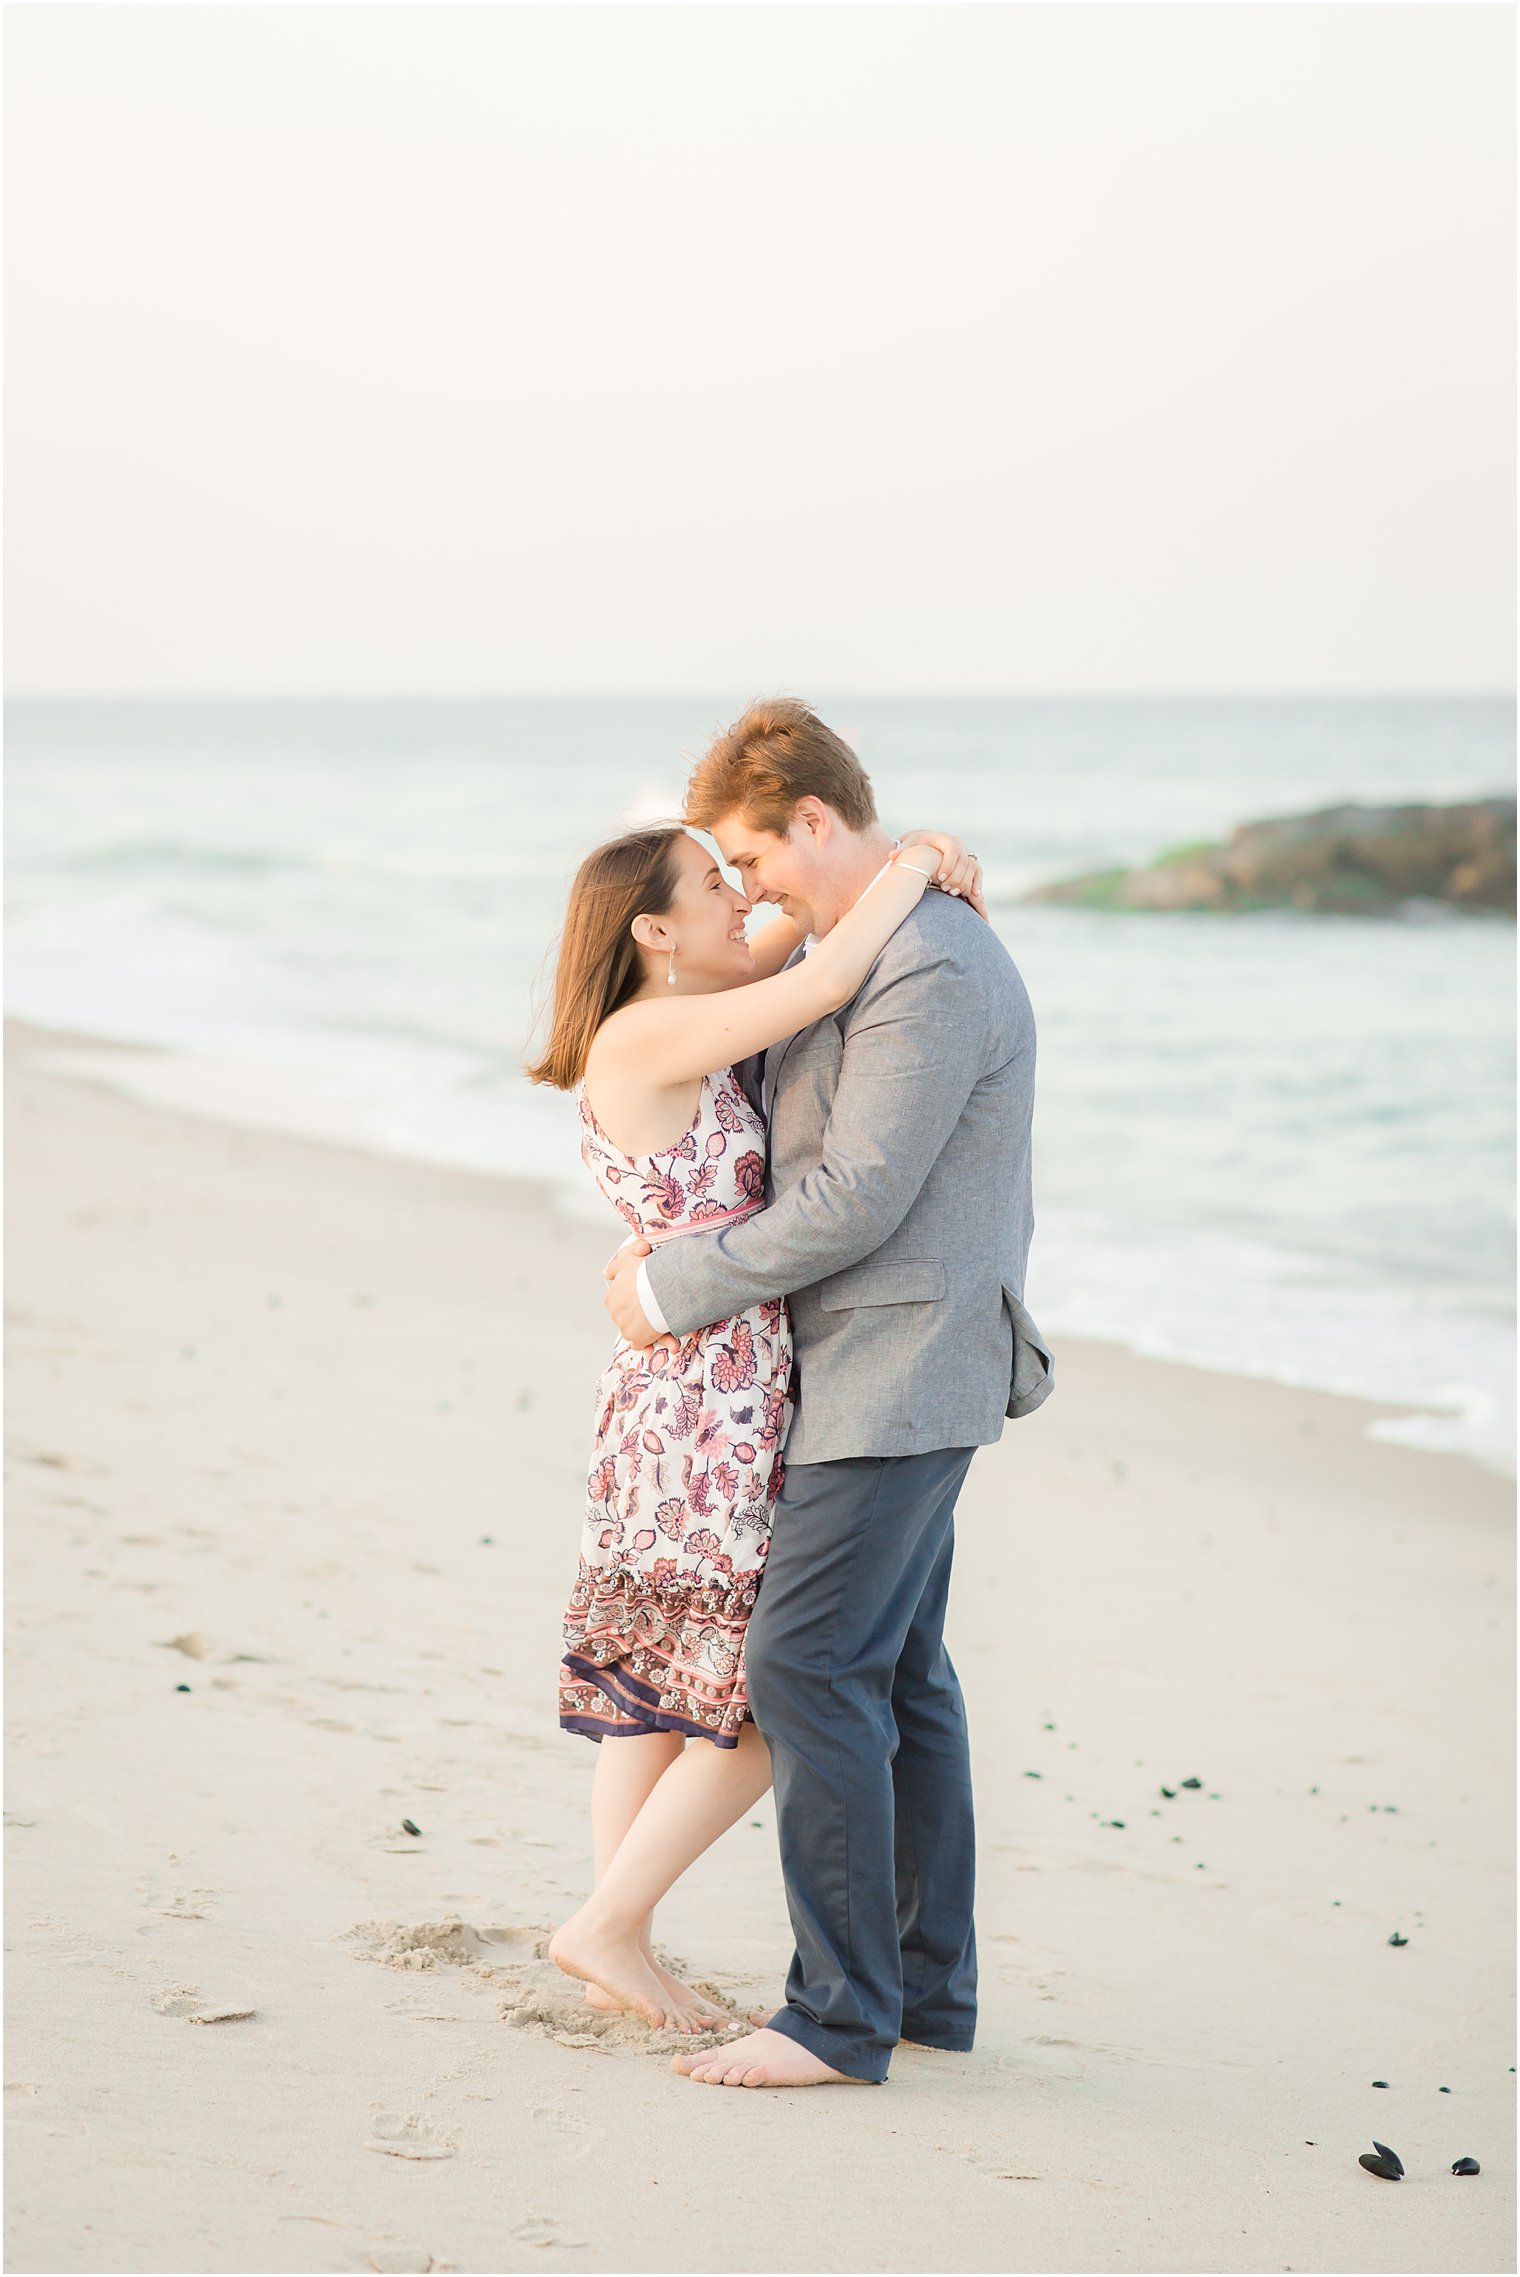 Romantic photo of bride and groom on the beach